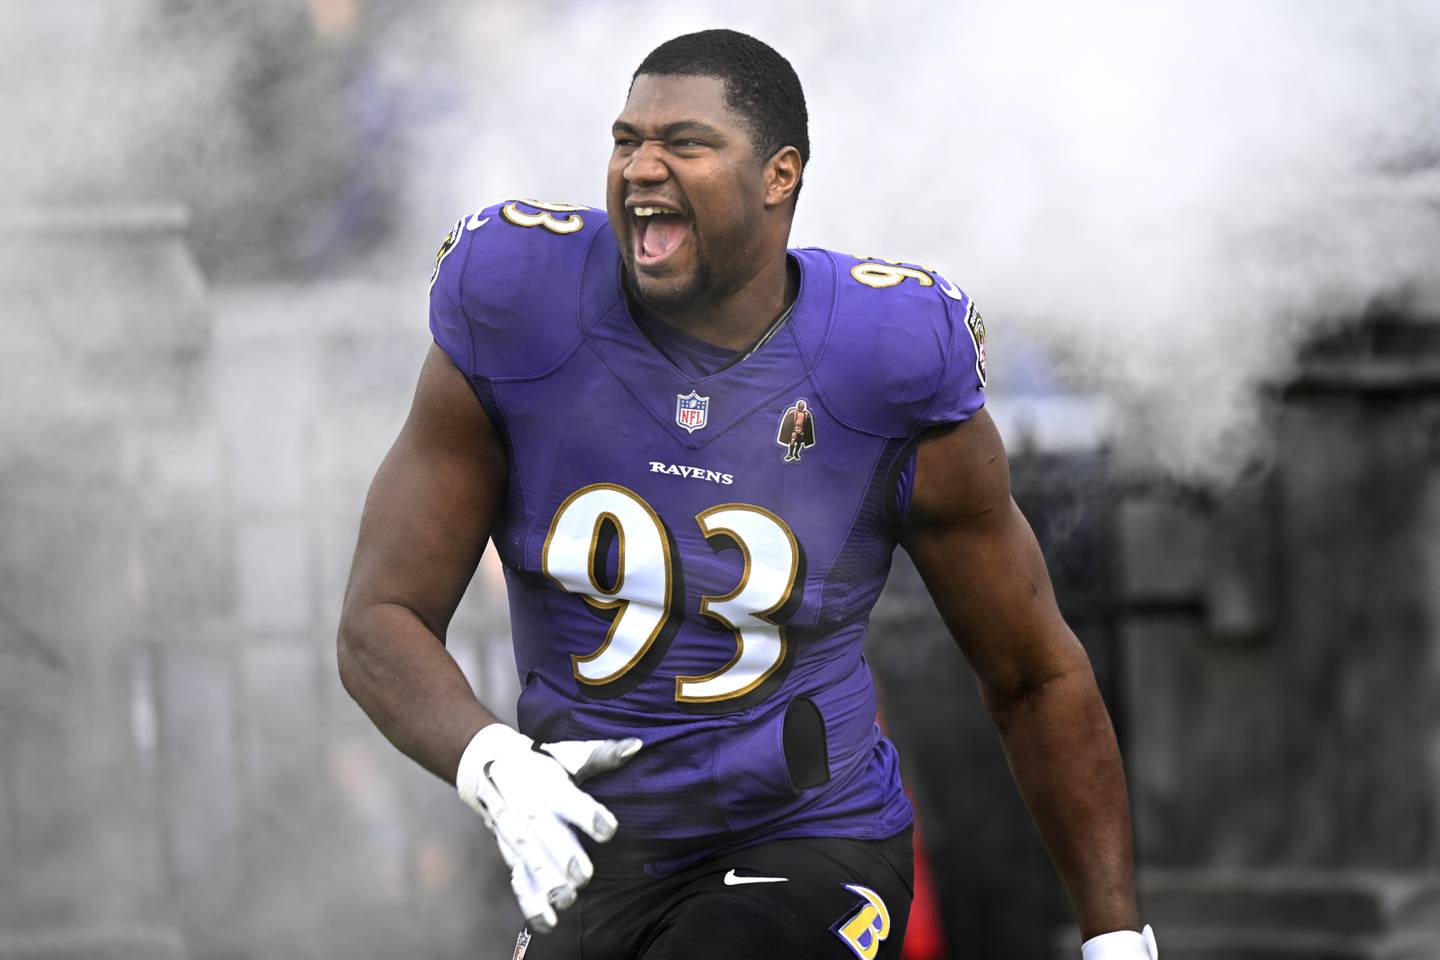 BALTIMORE, MARYLAND - DECEMBER 04: Calais Campbell #93 of the Baltimore Ravens takes the field prior to a game against the Denver Broncos at M&T Bank Stadium on December 04, 2022 in Baltimore, Maryland.